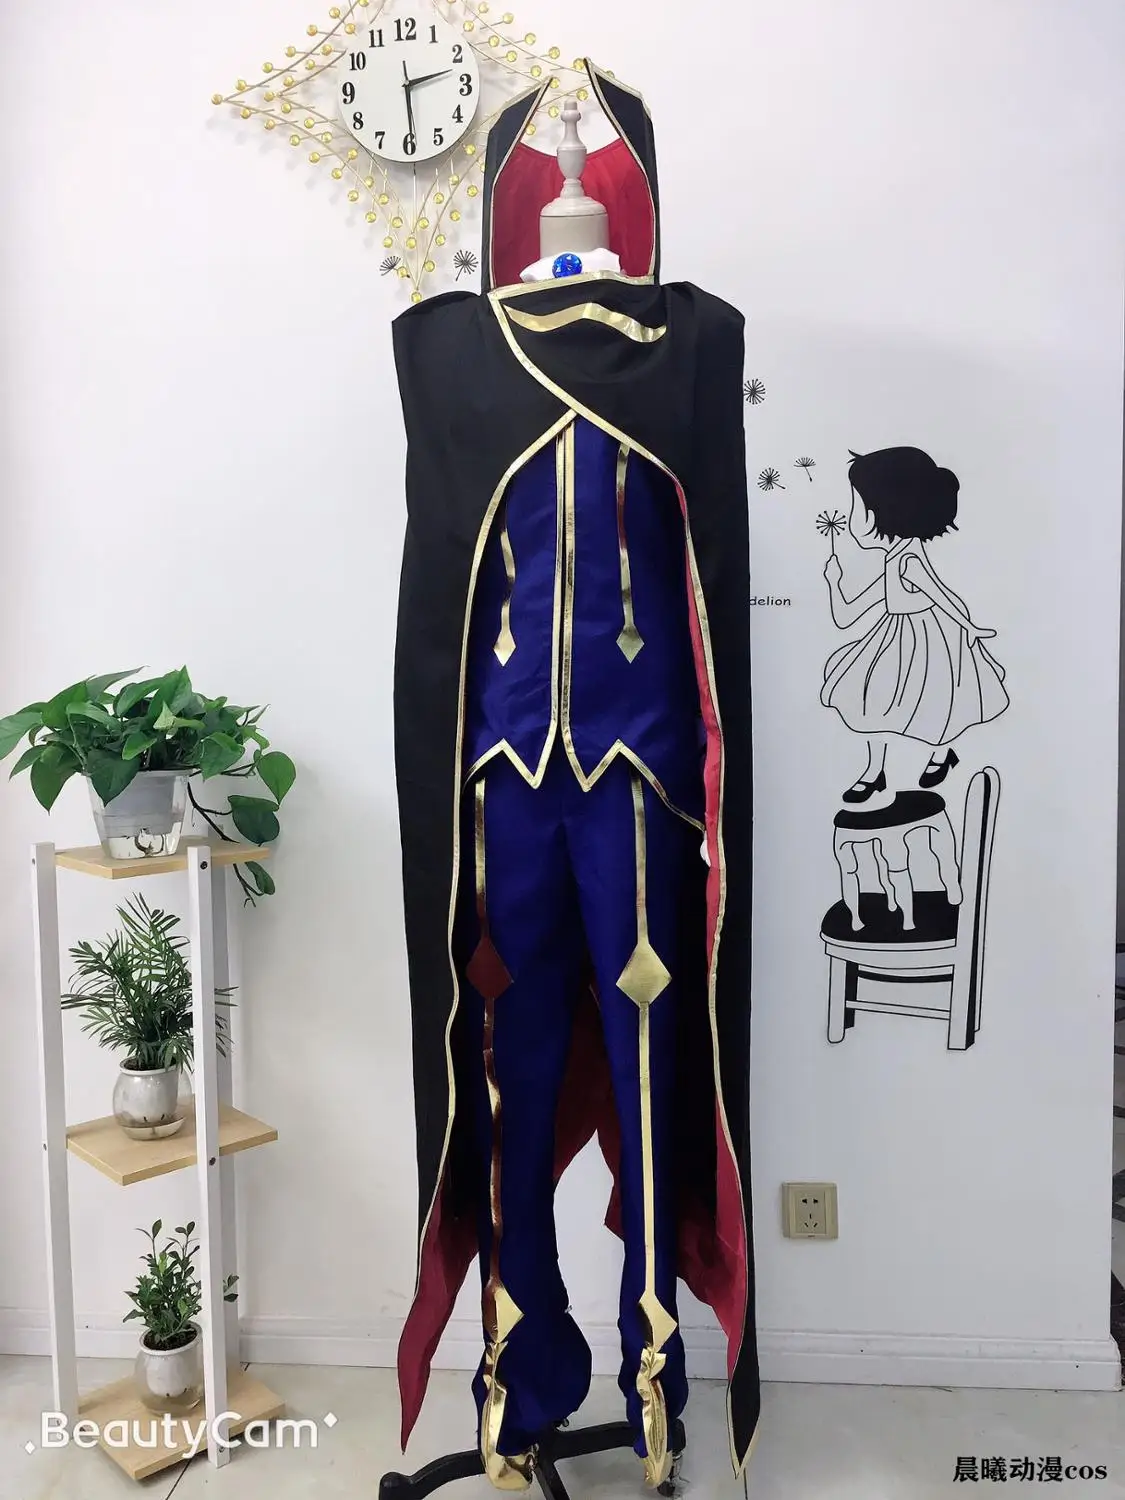 

New Code Geass R2 Zero Cosplay Costumes Party Fashion Bule Uniform Suit Full Set For Unisex S-XXL Or Custom-Make Any Size